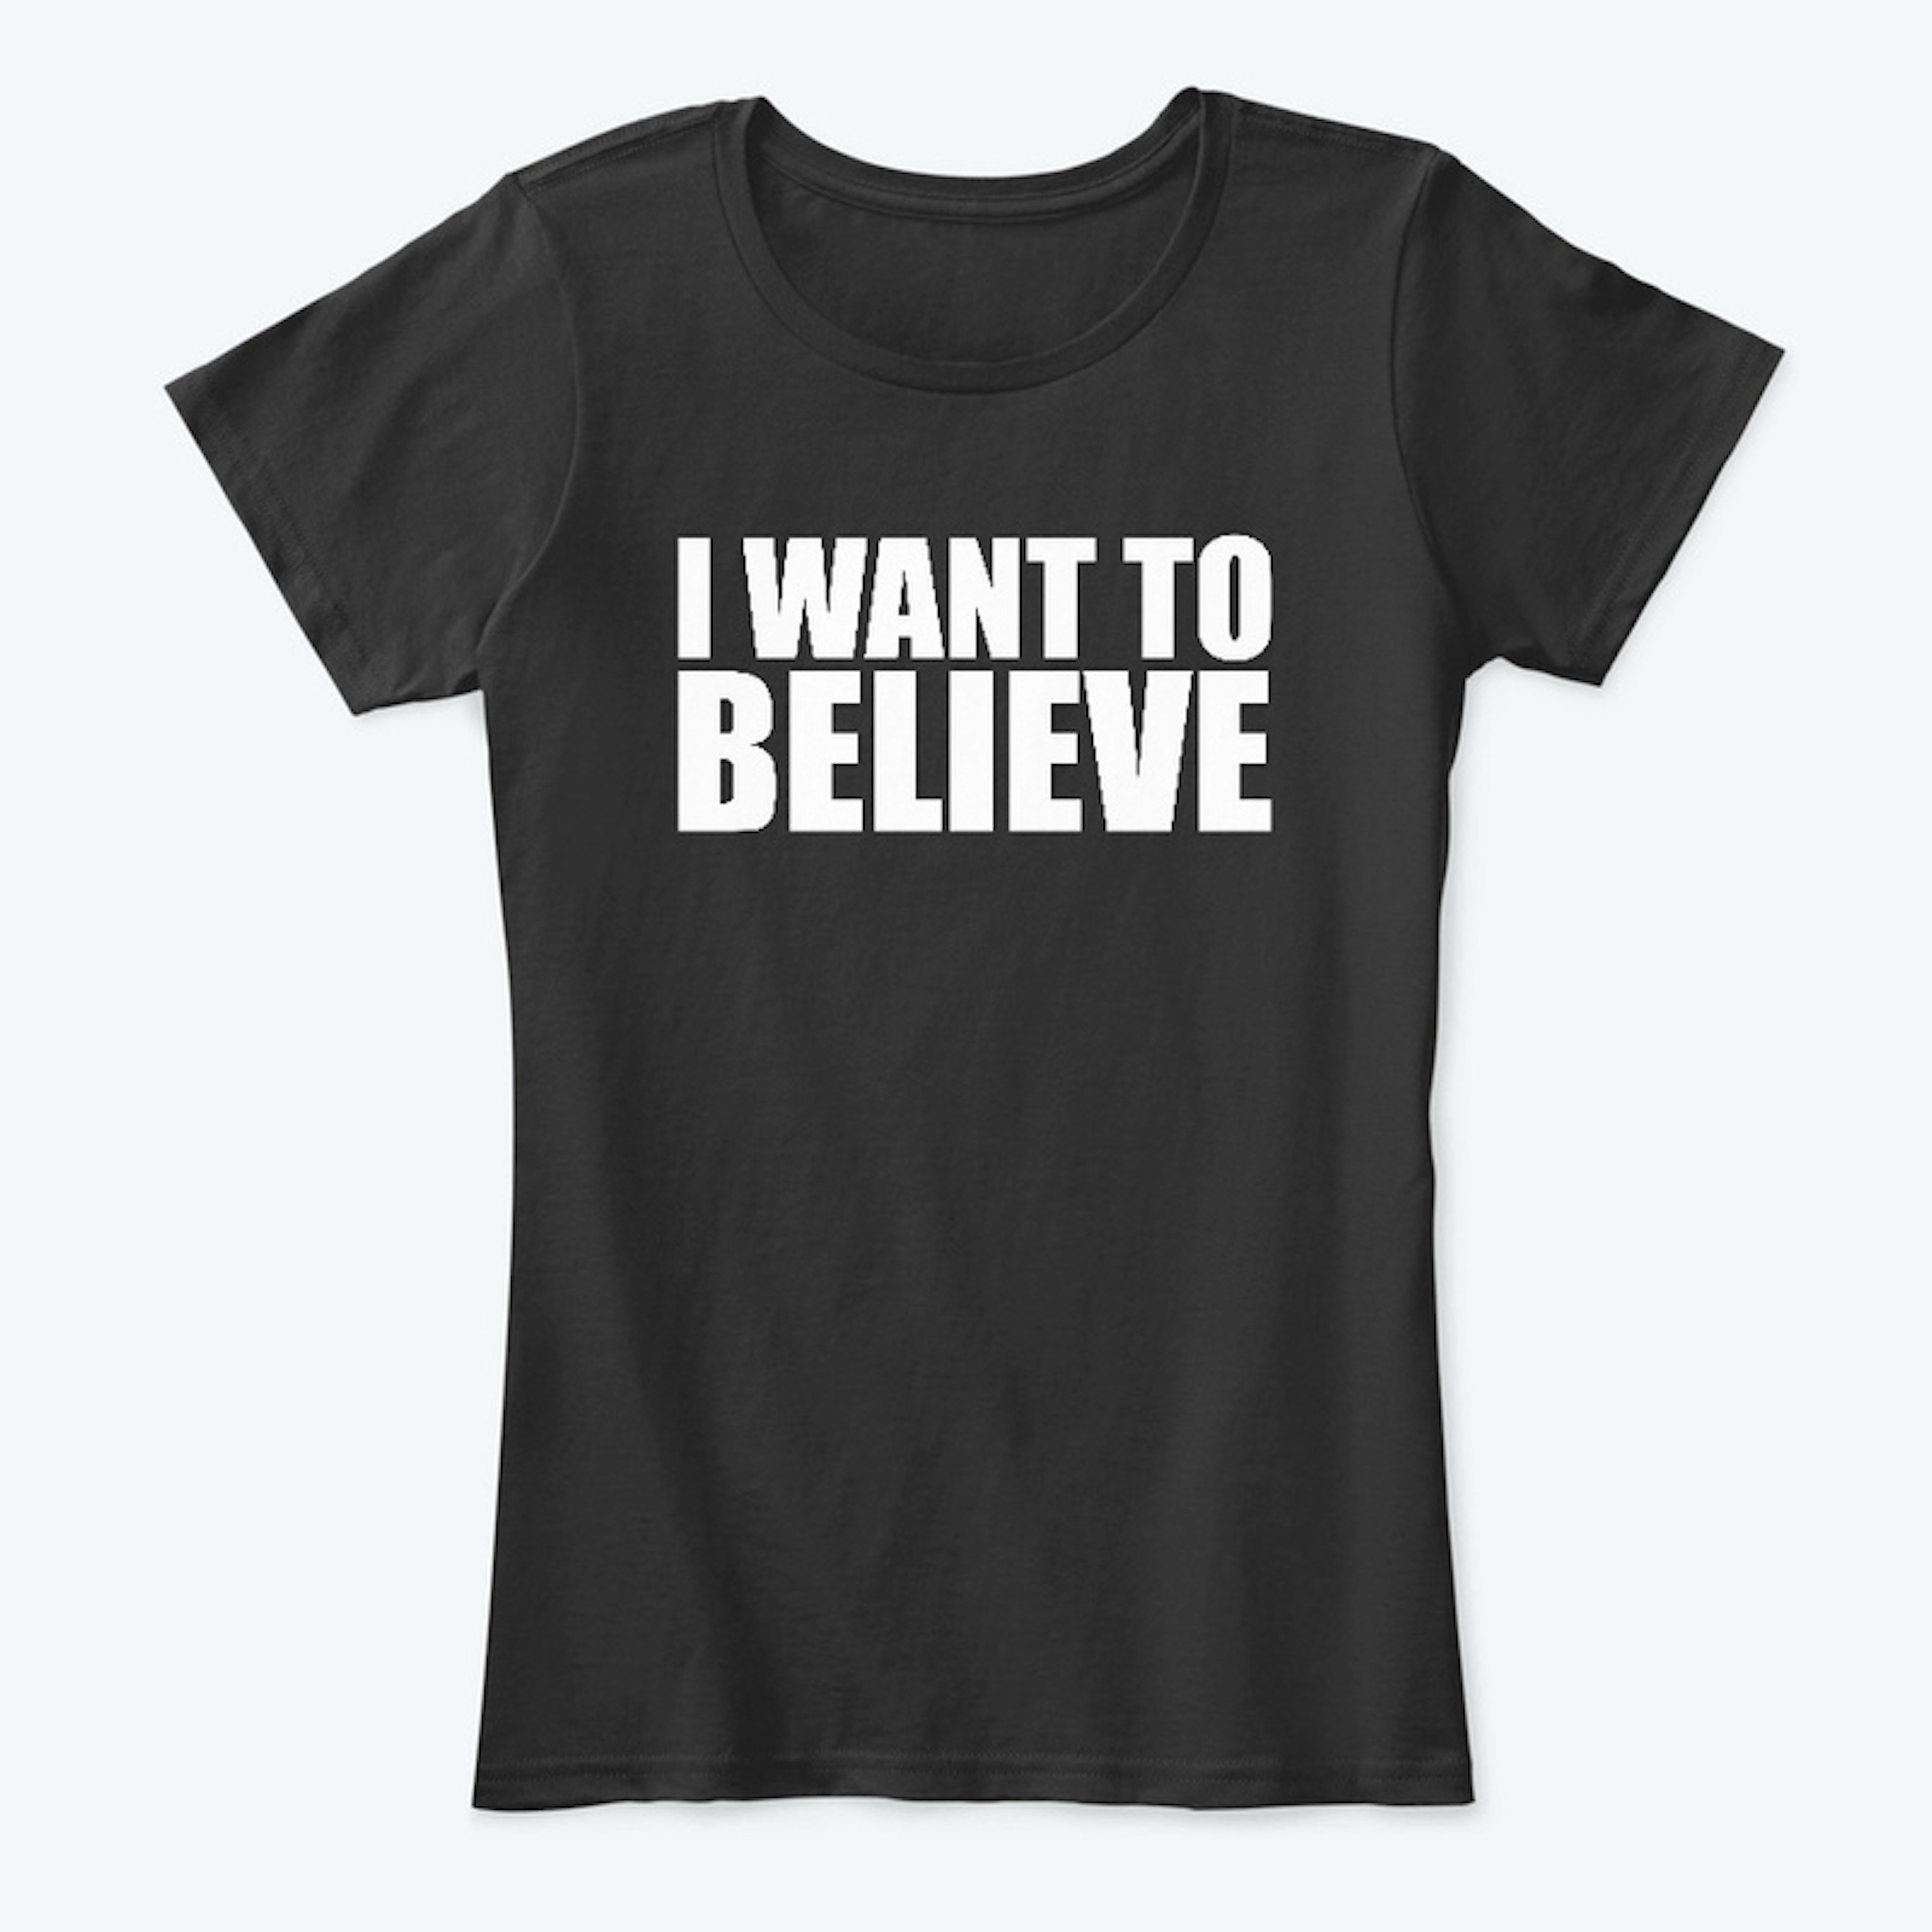 Quote: "I Want To Believe"